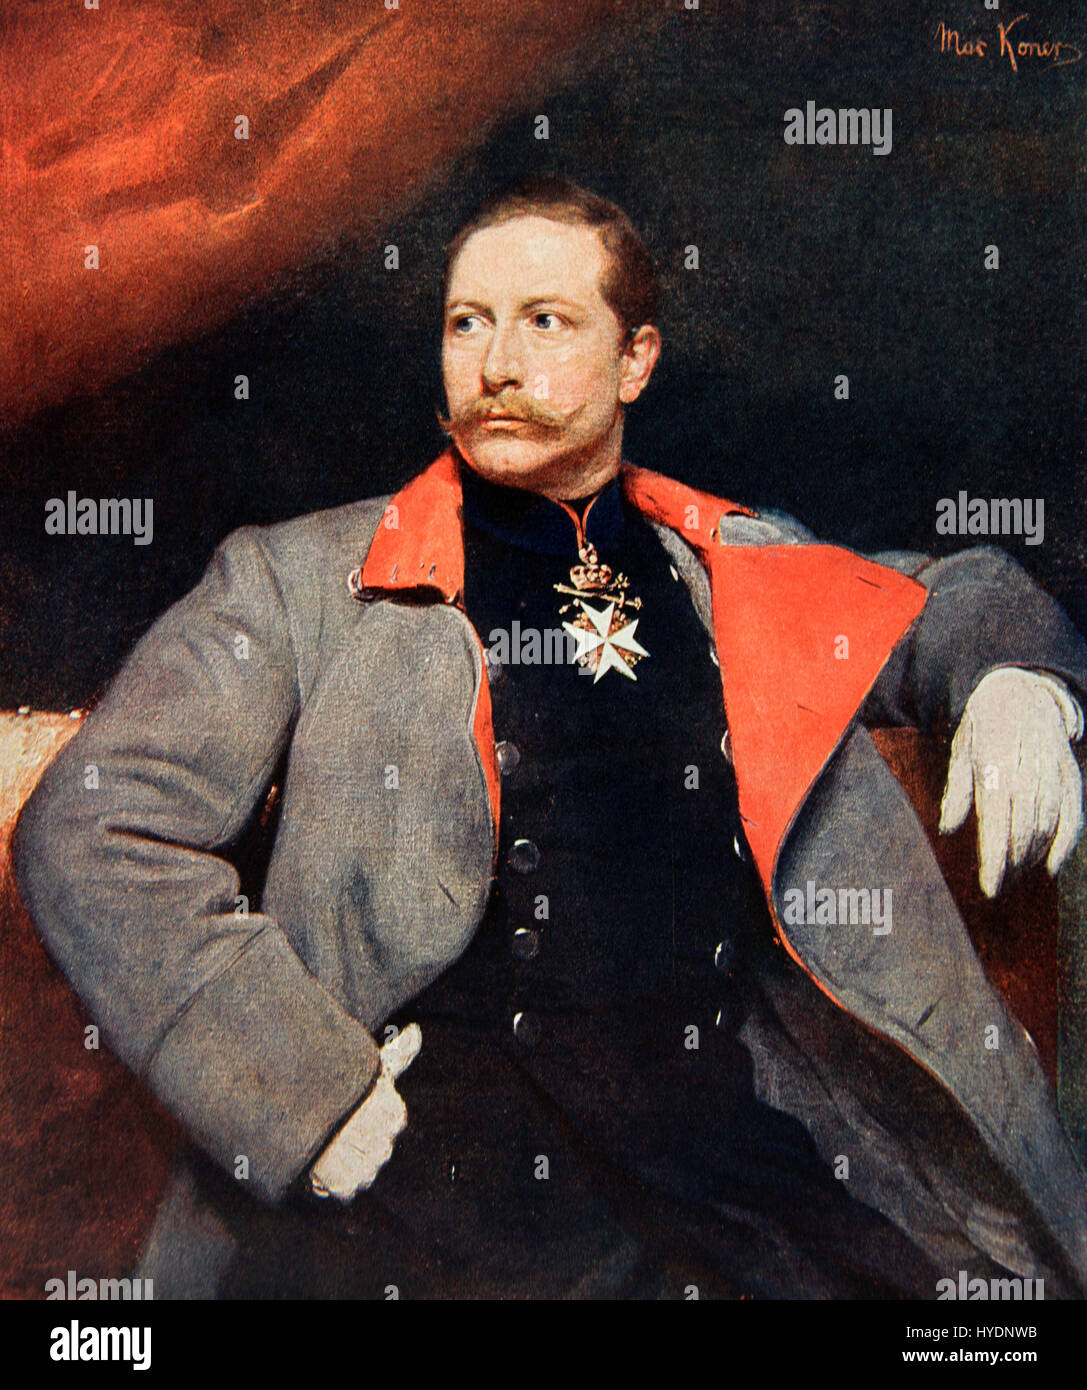 Wilhelm II of Germany (1859-1941). King of Prussia and German Emperor (1888-1918). Wilhelm II in the gray military coat, (1892). Portrait by the German portrait painter Max Koner (1854-1900). 'Historia Universal', 1942. Stock Photo